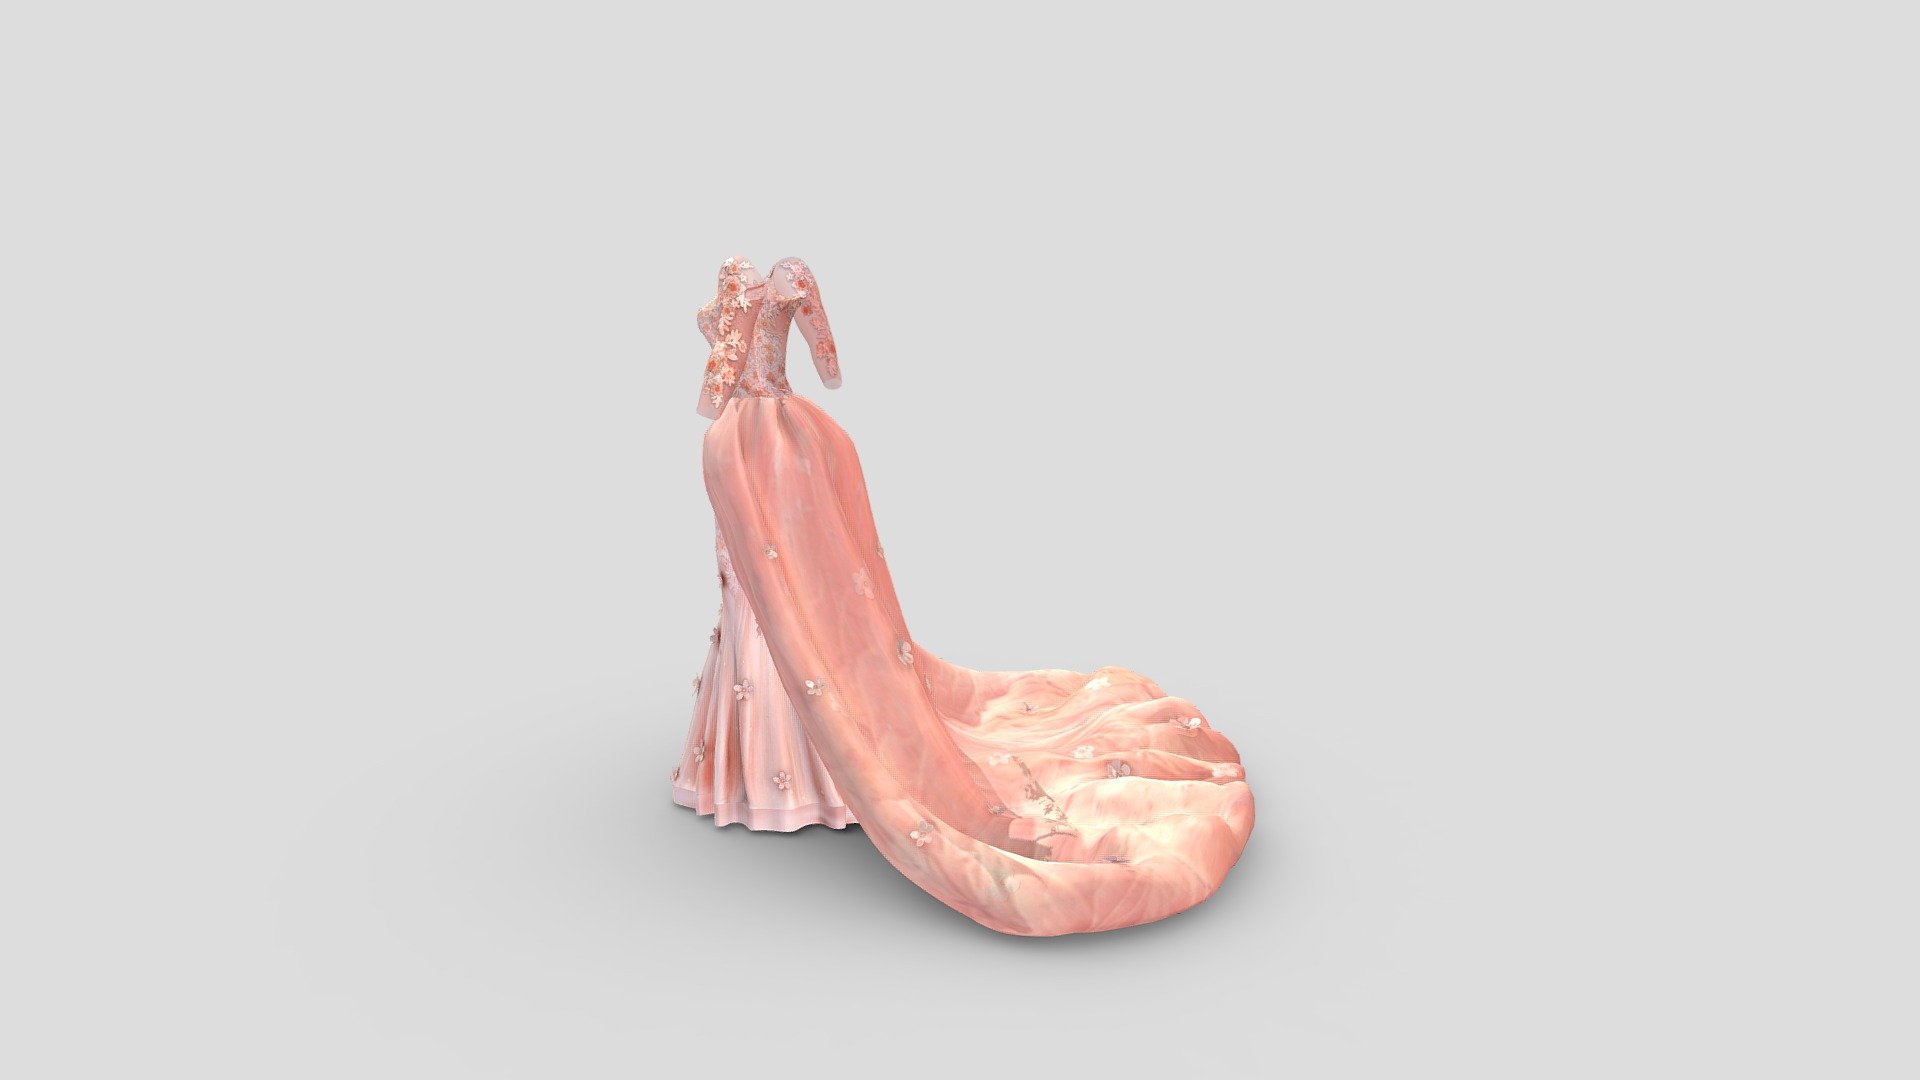 Peach Prom Dress With Train

Can be fitted to any character

Clean topology

No overlapping smart optimized unwrapped UVs

High-quality realistic textures

FBX, OBJ, gITF, USDZ (request other formats)

PBR or Classic

Type     user:3dia &ldquo;search term